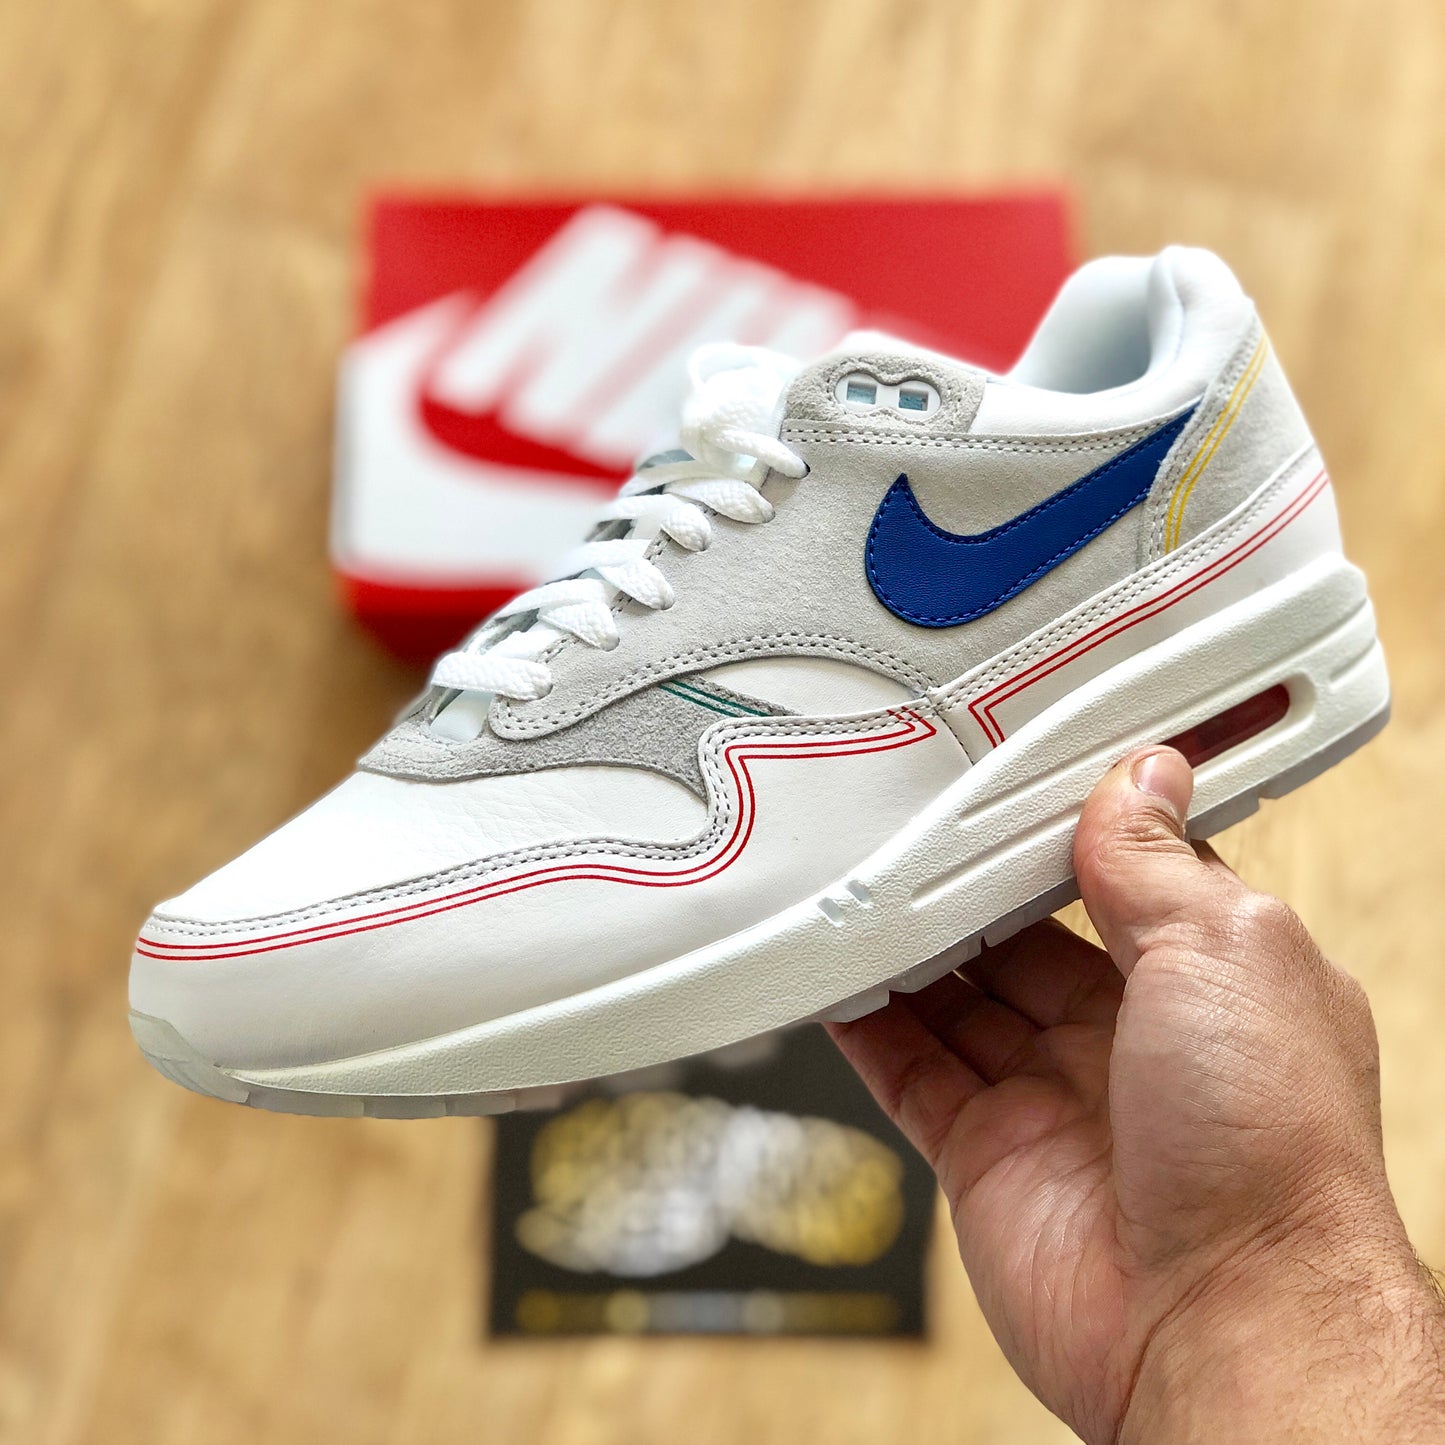 Nike Air Max 1 Pompidou - By Day